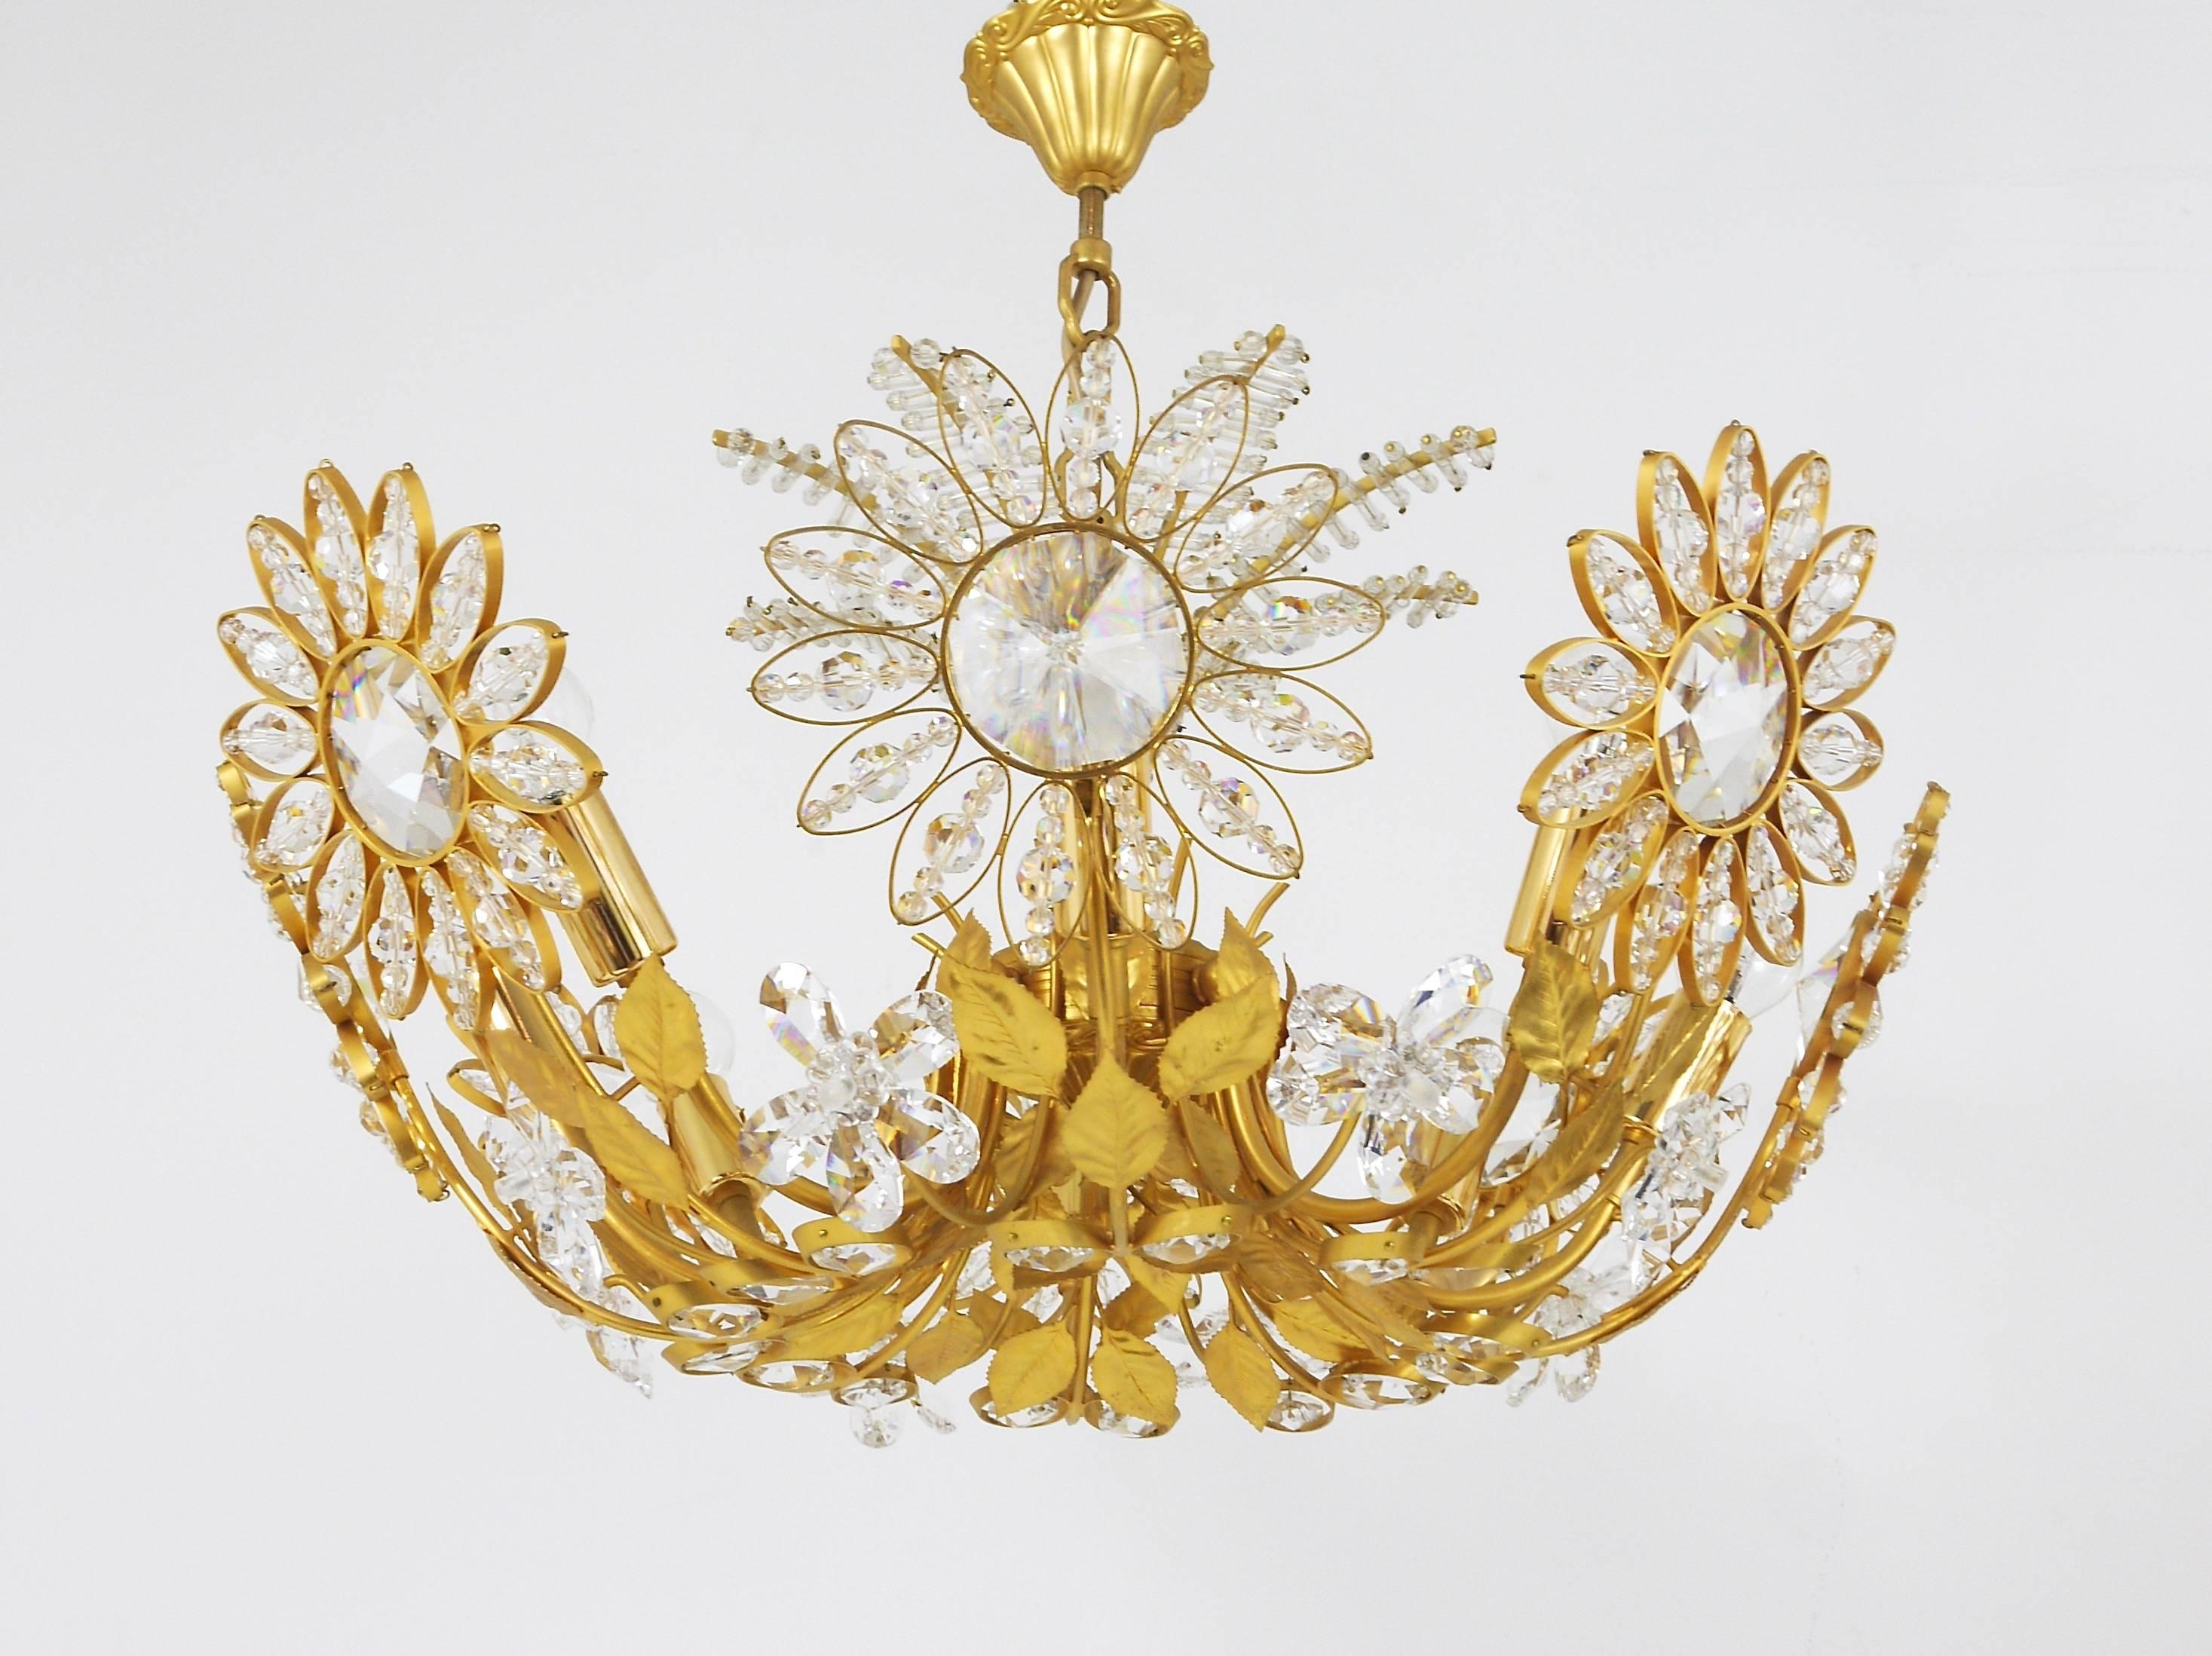 A beautiful hand-crafted floral chandelier with a decorative palm tree top from the 1970s by Ernst Palme, manufactured by Palwa (Palme & Walter), Germany. Made of gold-plated brass with big faceted crystal glass petals. Has eight-light-sources. In